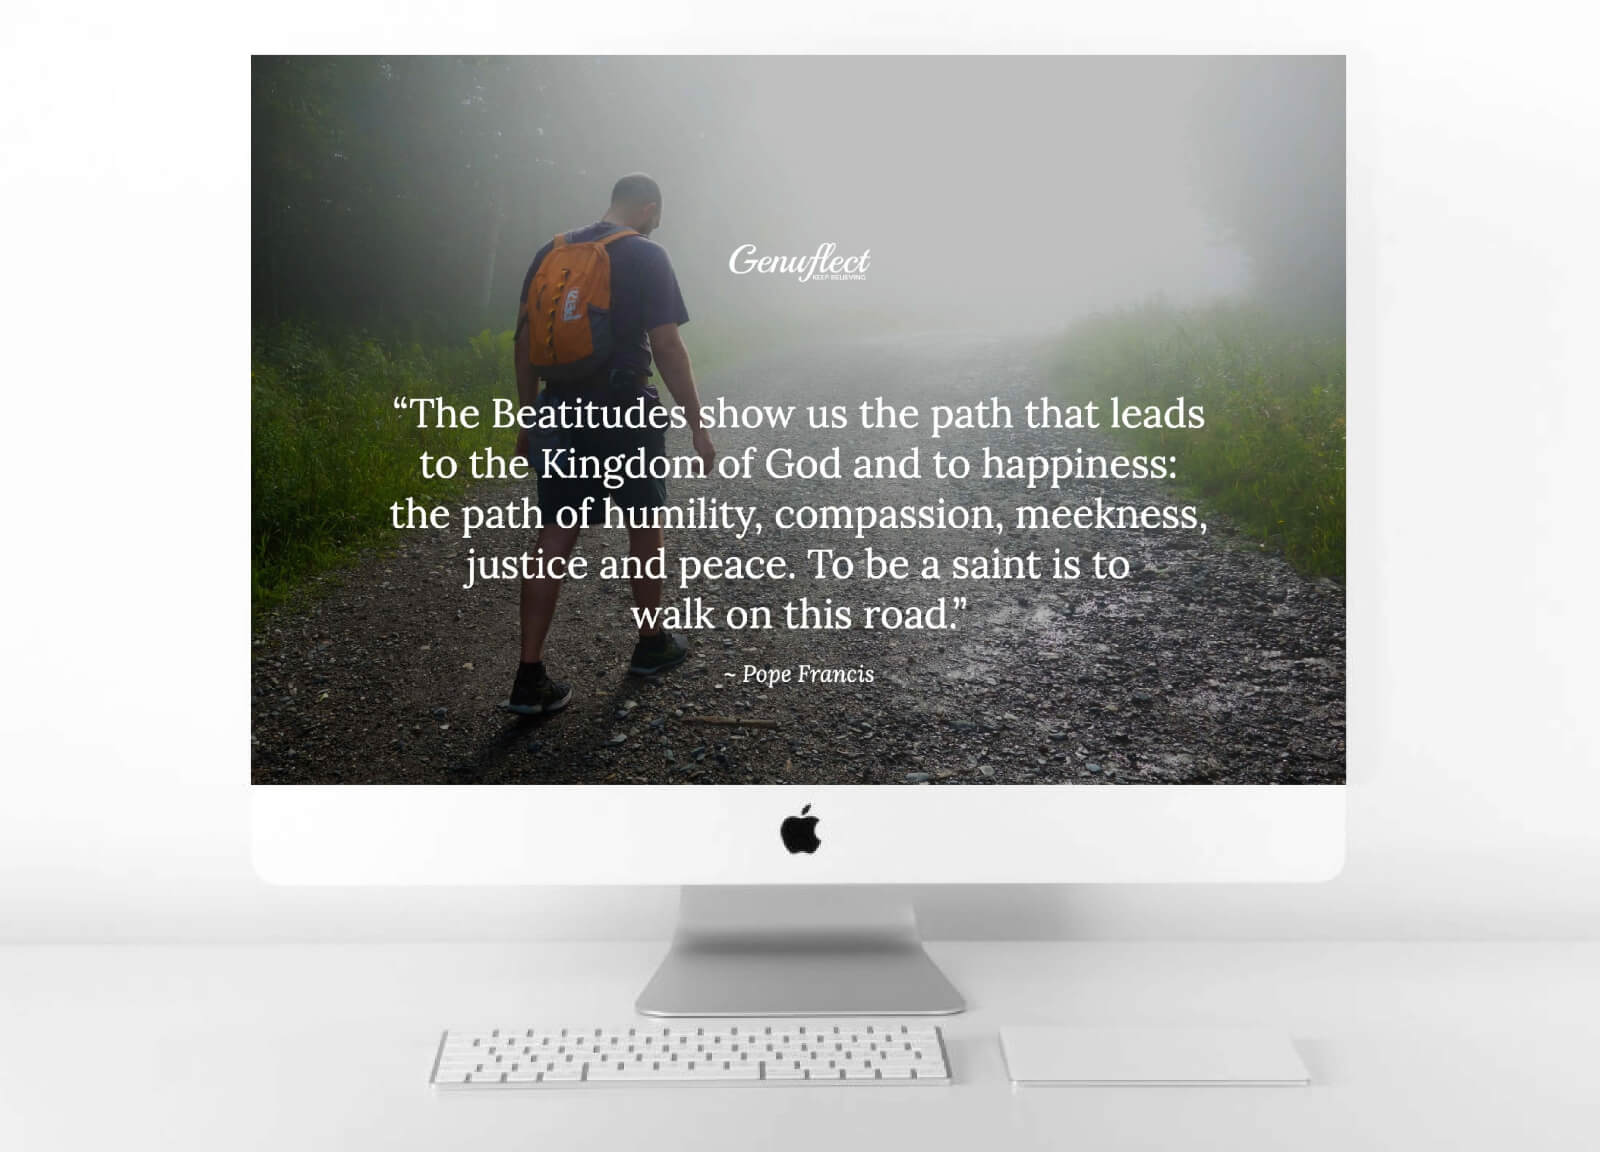 Genuflect background on computer with an image of a Man hiking with his head down on a dirt path on a foggy day and you can't see where the path leads